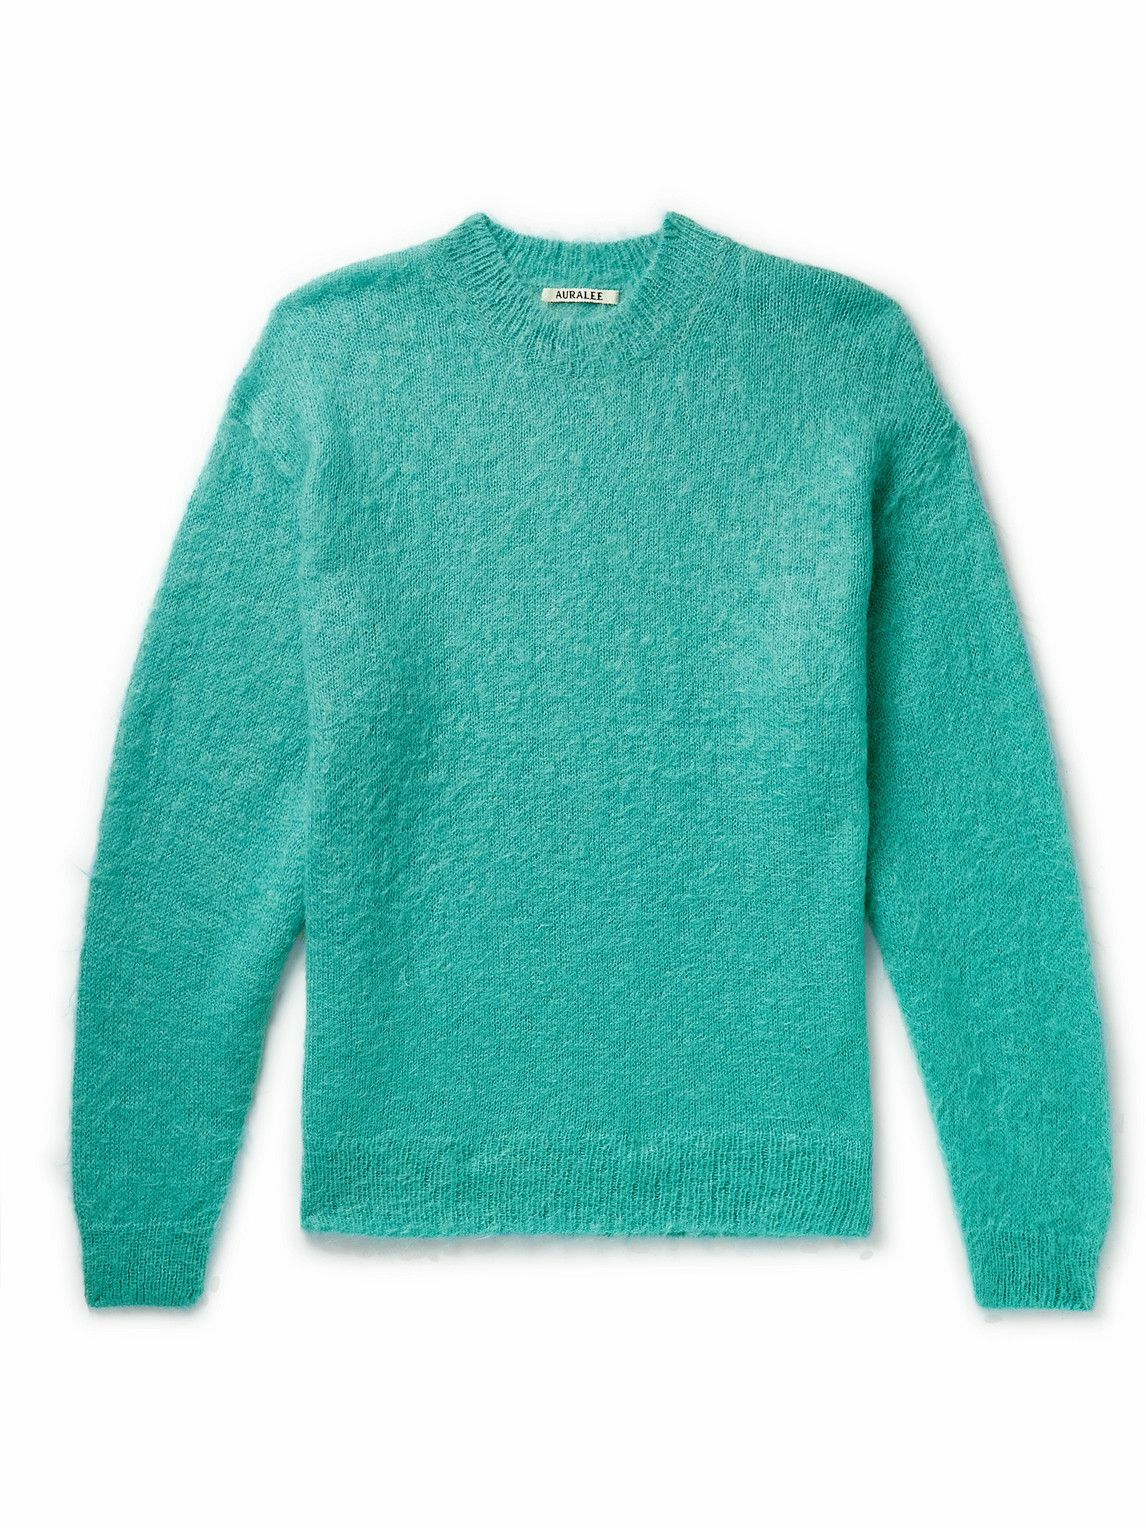 Auralee - Brushed Mohair and Wool-Blend Sweater - Blue Auralee